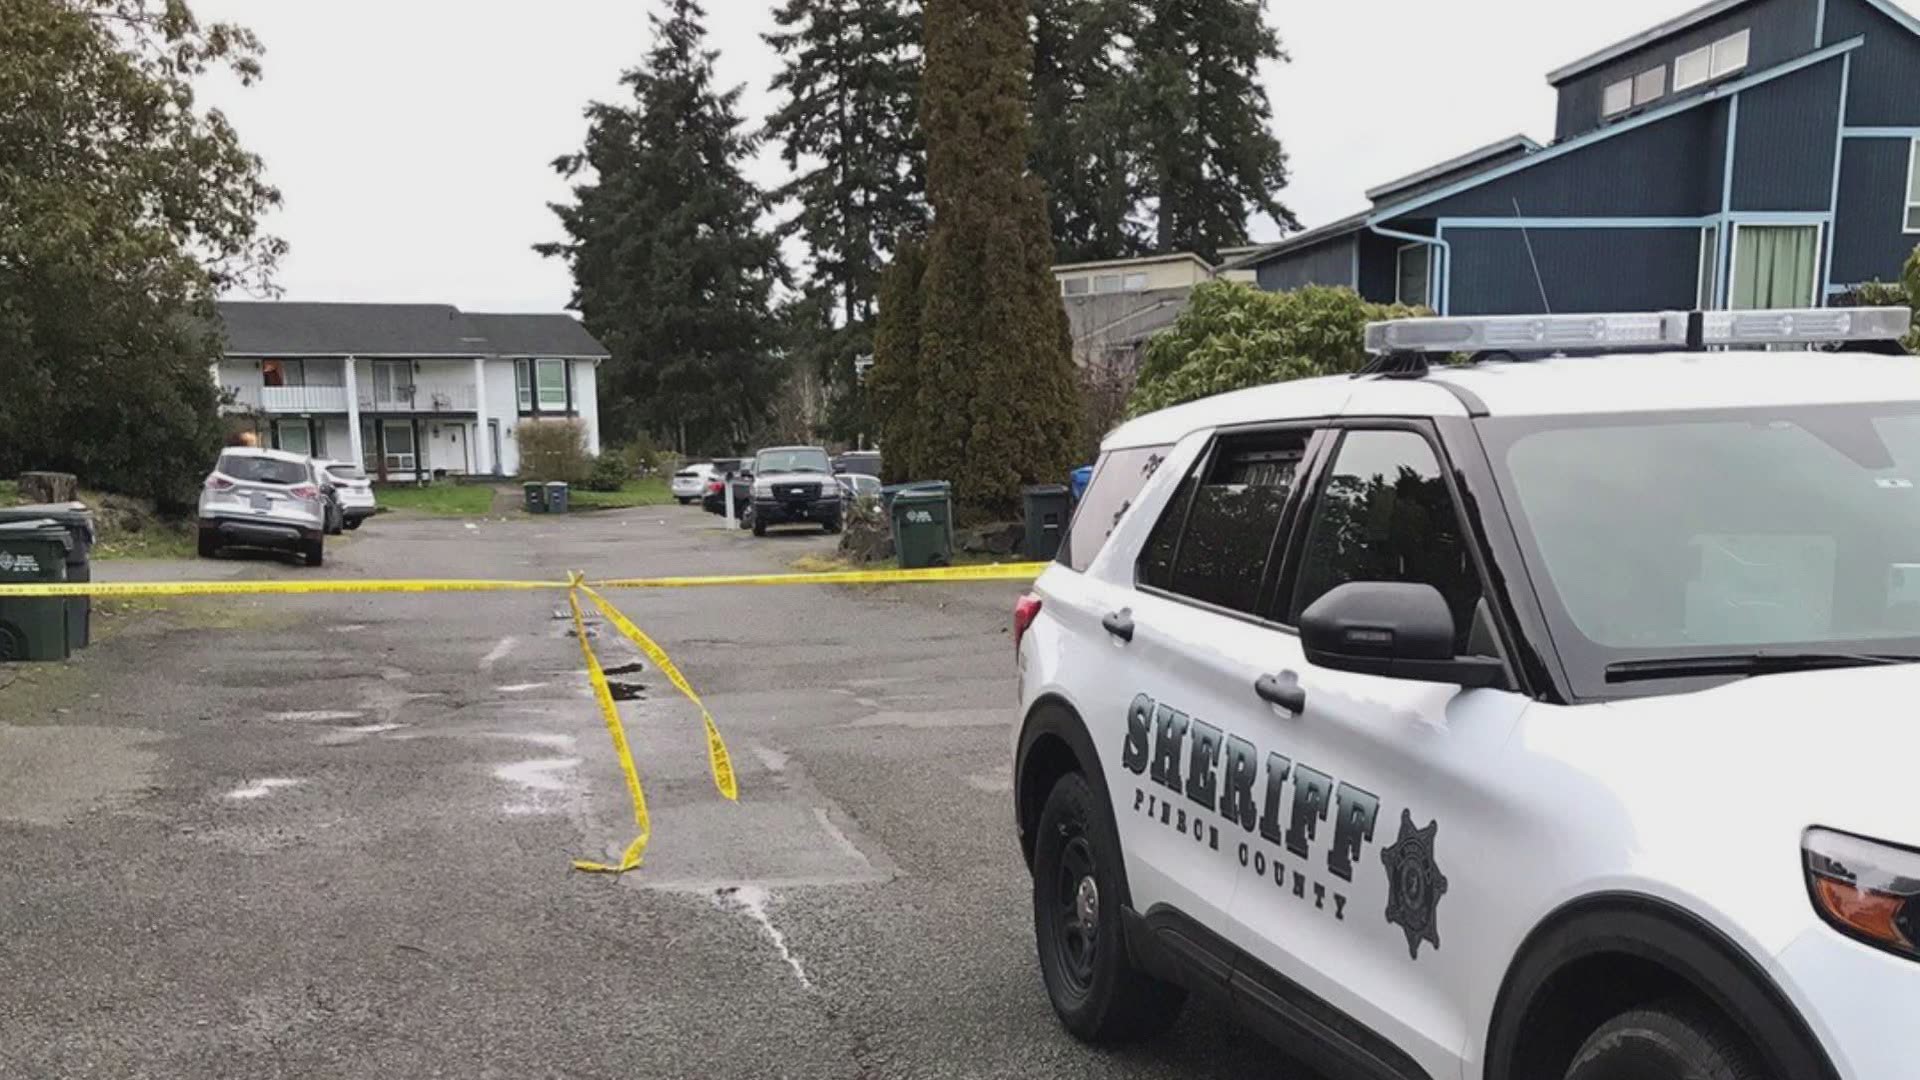 An 18-year-old man was killed and a second person is in the hospital after a fight broke out and shots were fired at a house party in Pierce County, officials say.